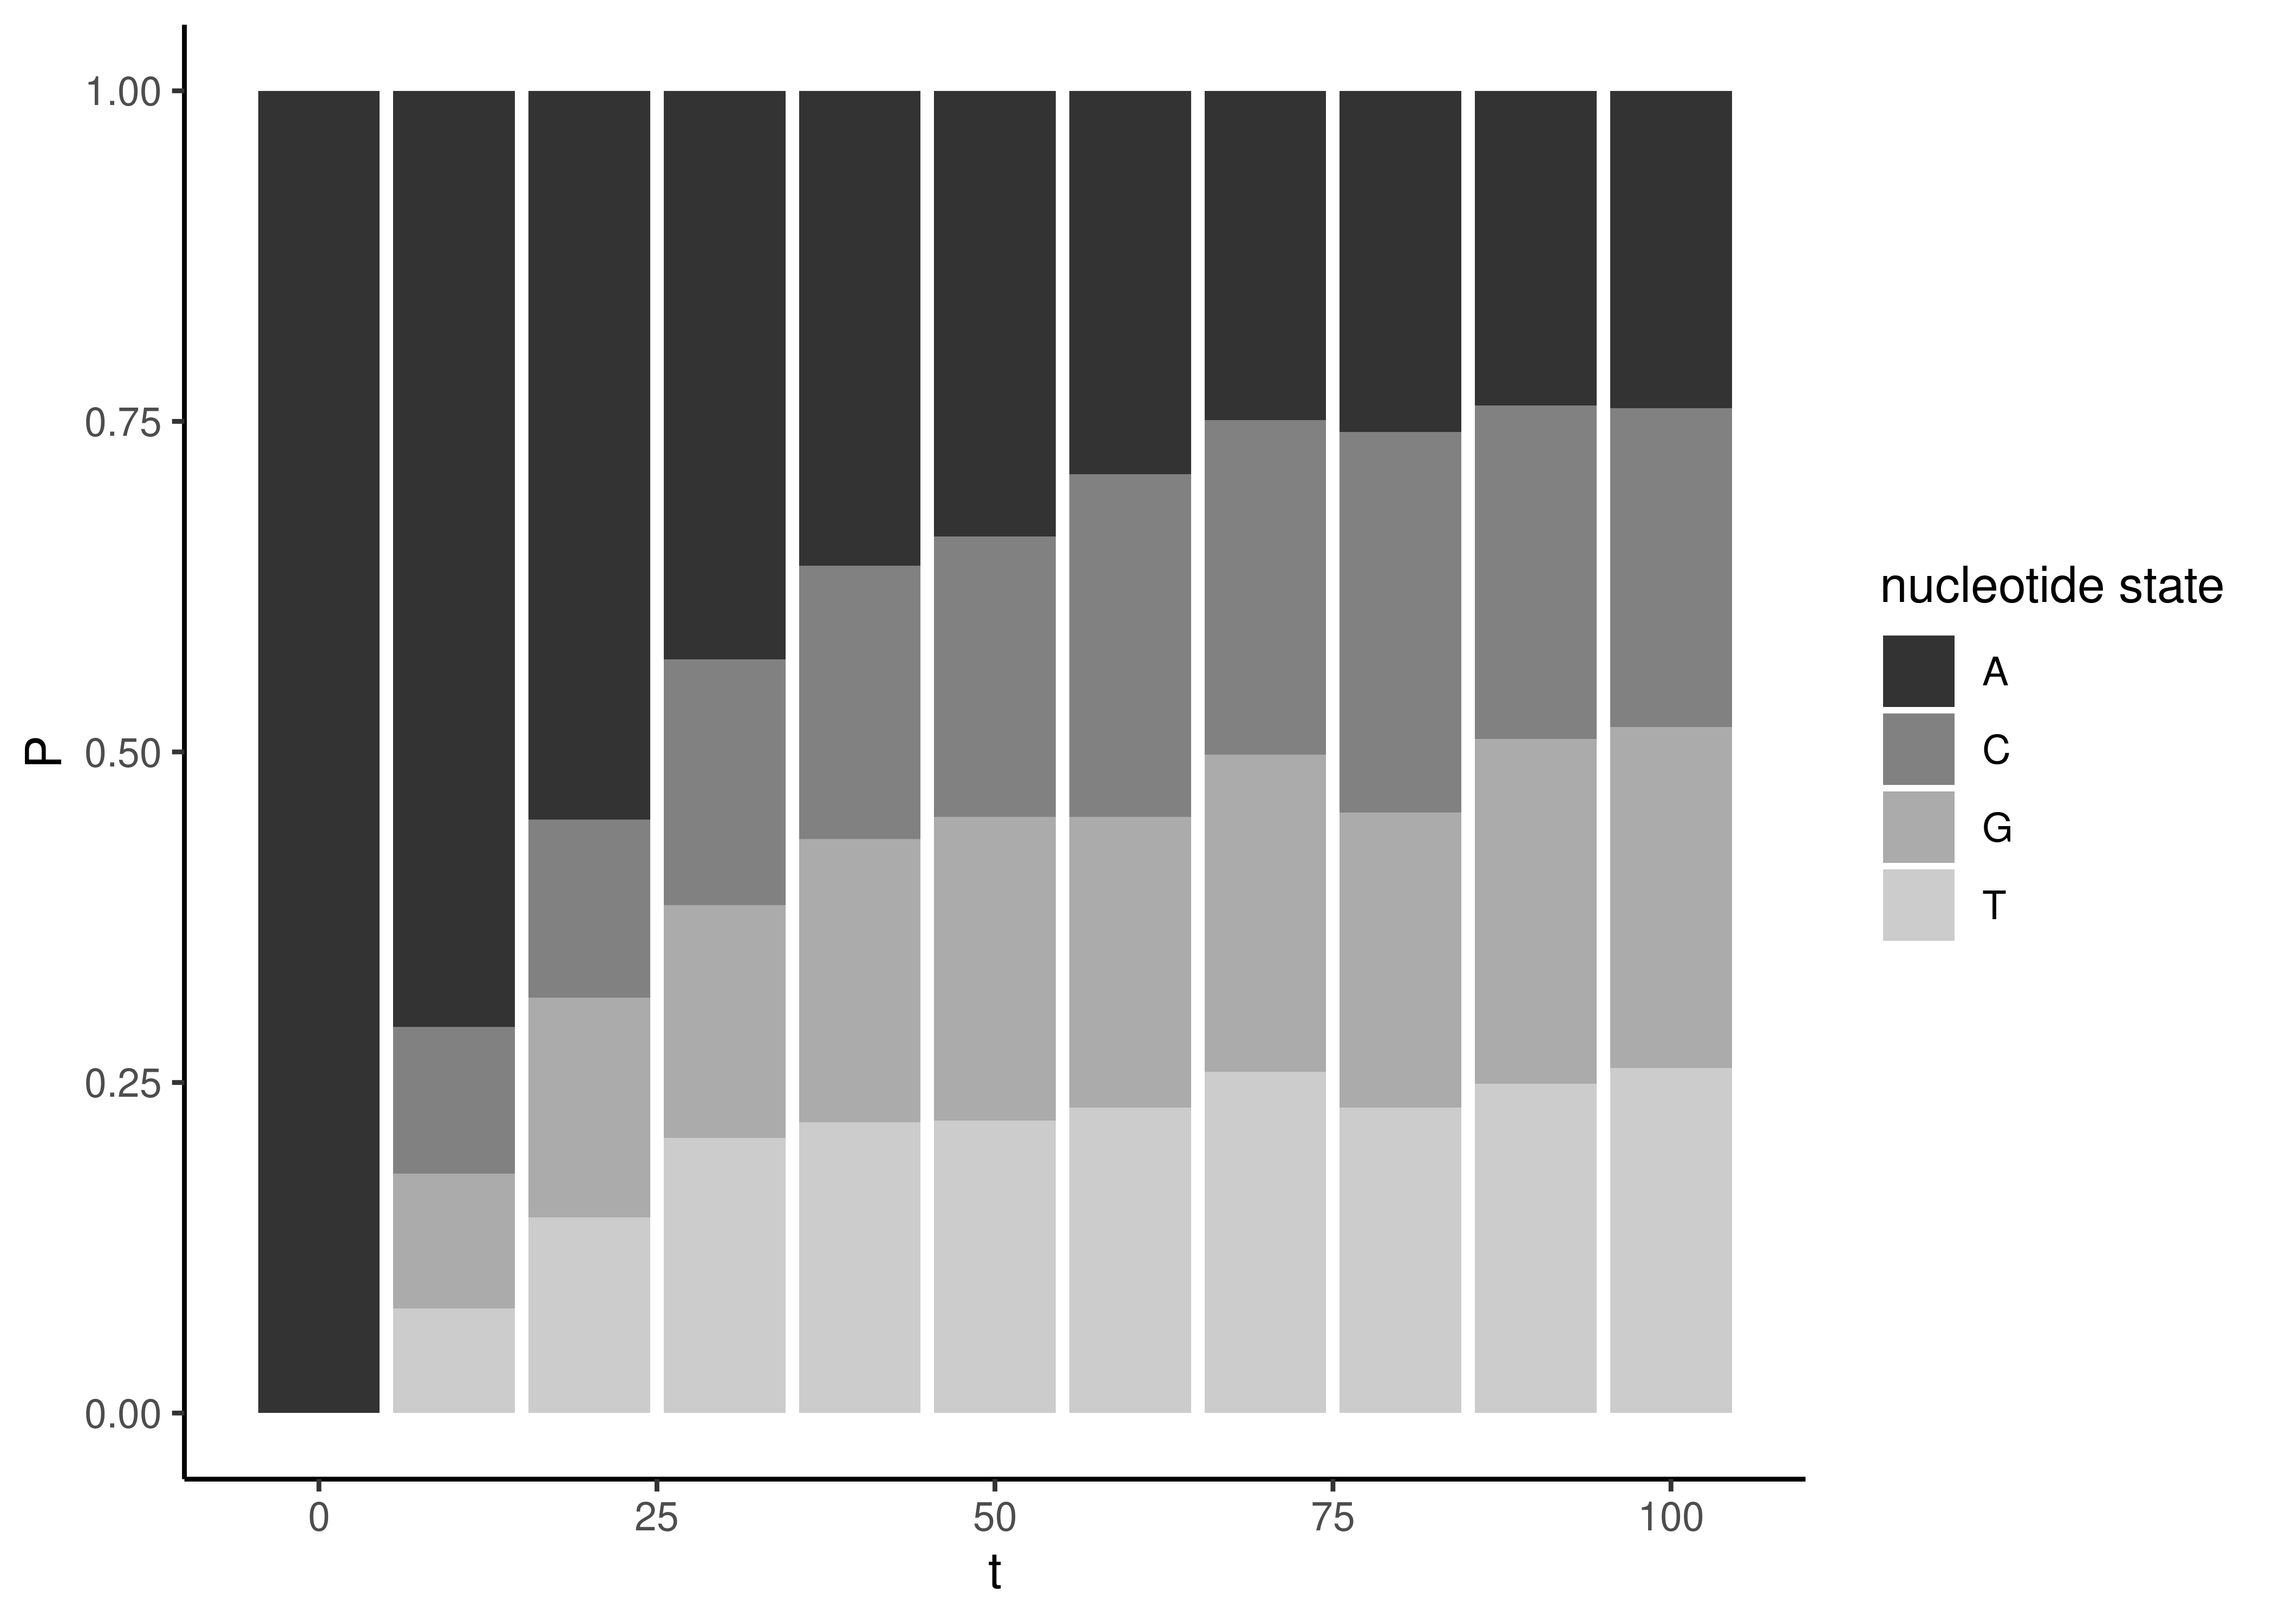 Stacked bar plots indicating the frequency of each nucleotide after simulated evolution for a specified amount of time. The rate of evolution is $\mu=0.050$. There are 1000 replicate simulations for each value of time. At time $t=0$ (no evolution), the end result is always the same as the initial value, which is fixed at A in these simulations. As the length of time increases, the four nucleotides converge on equal proportions of 0.25 each.